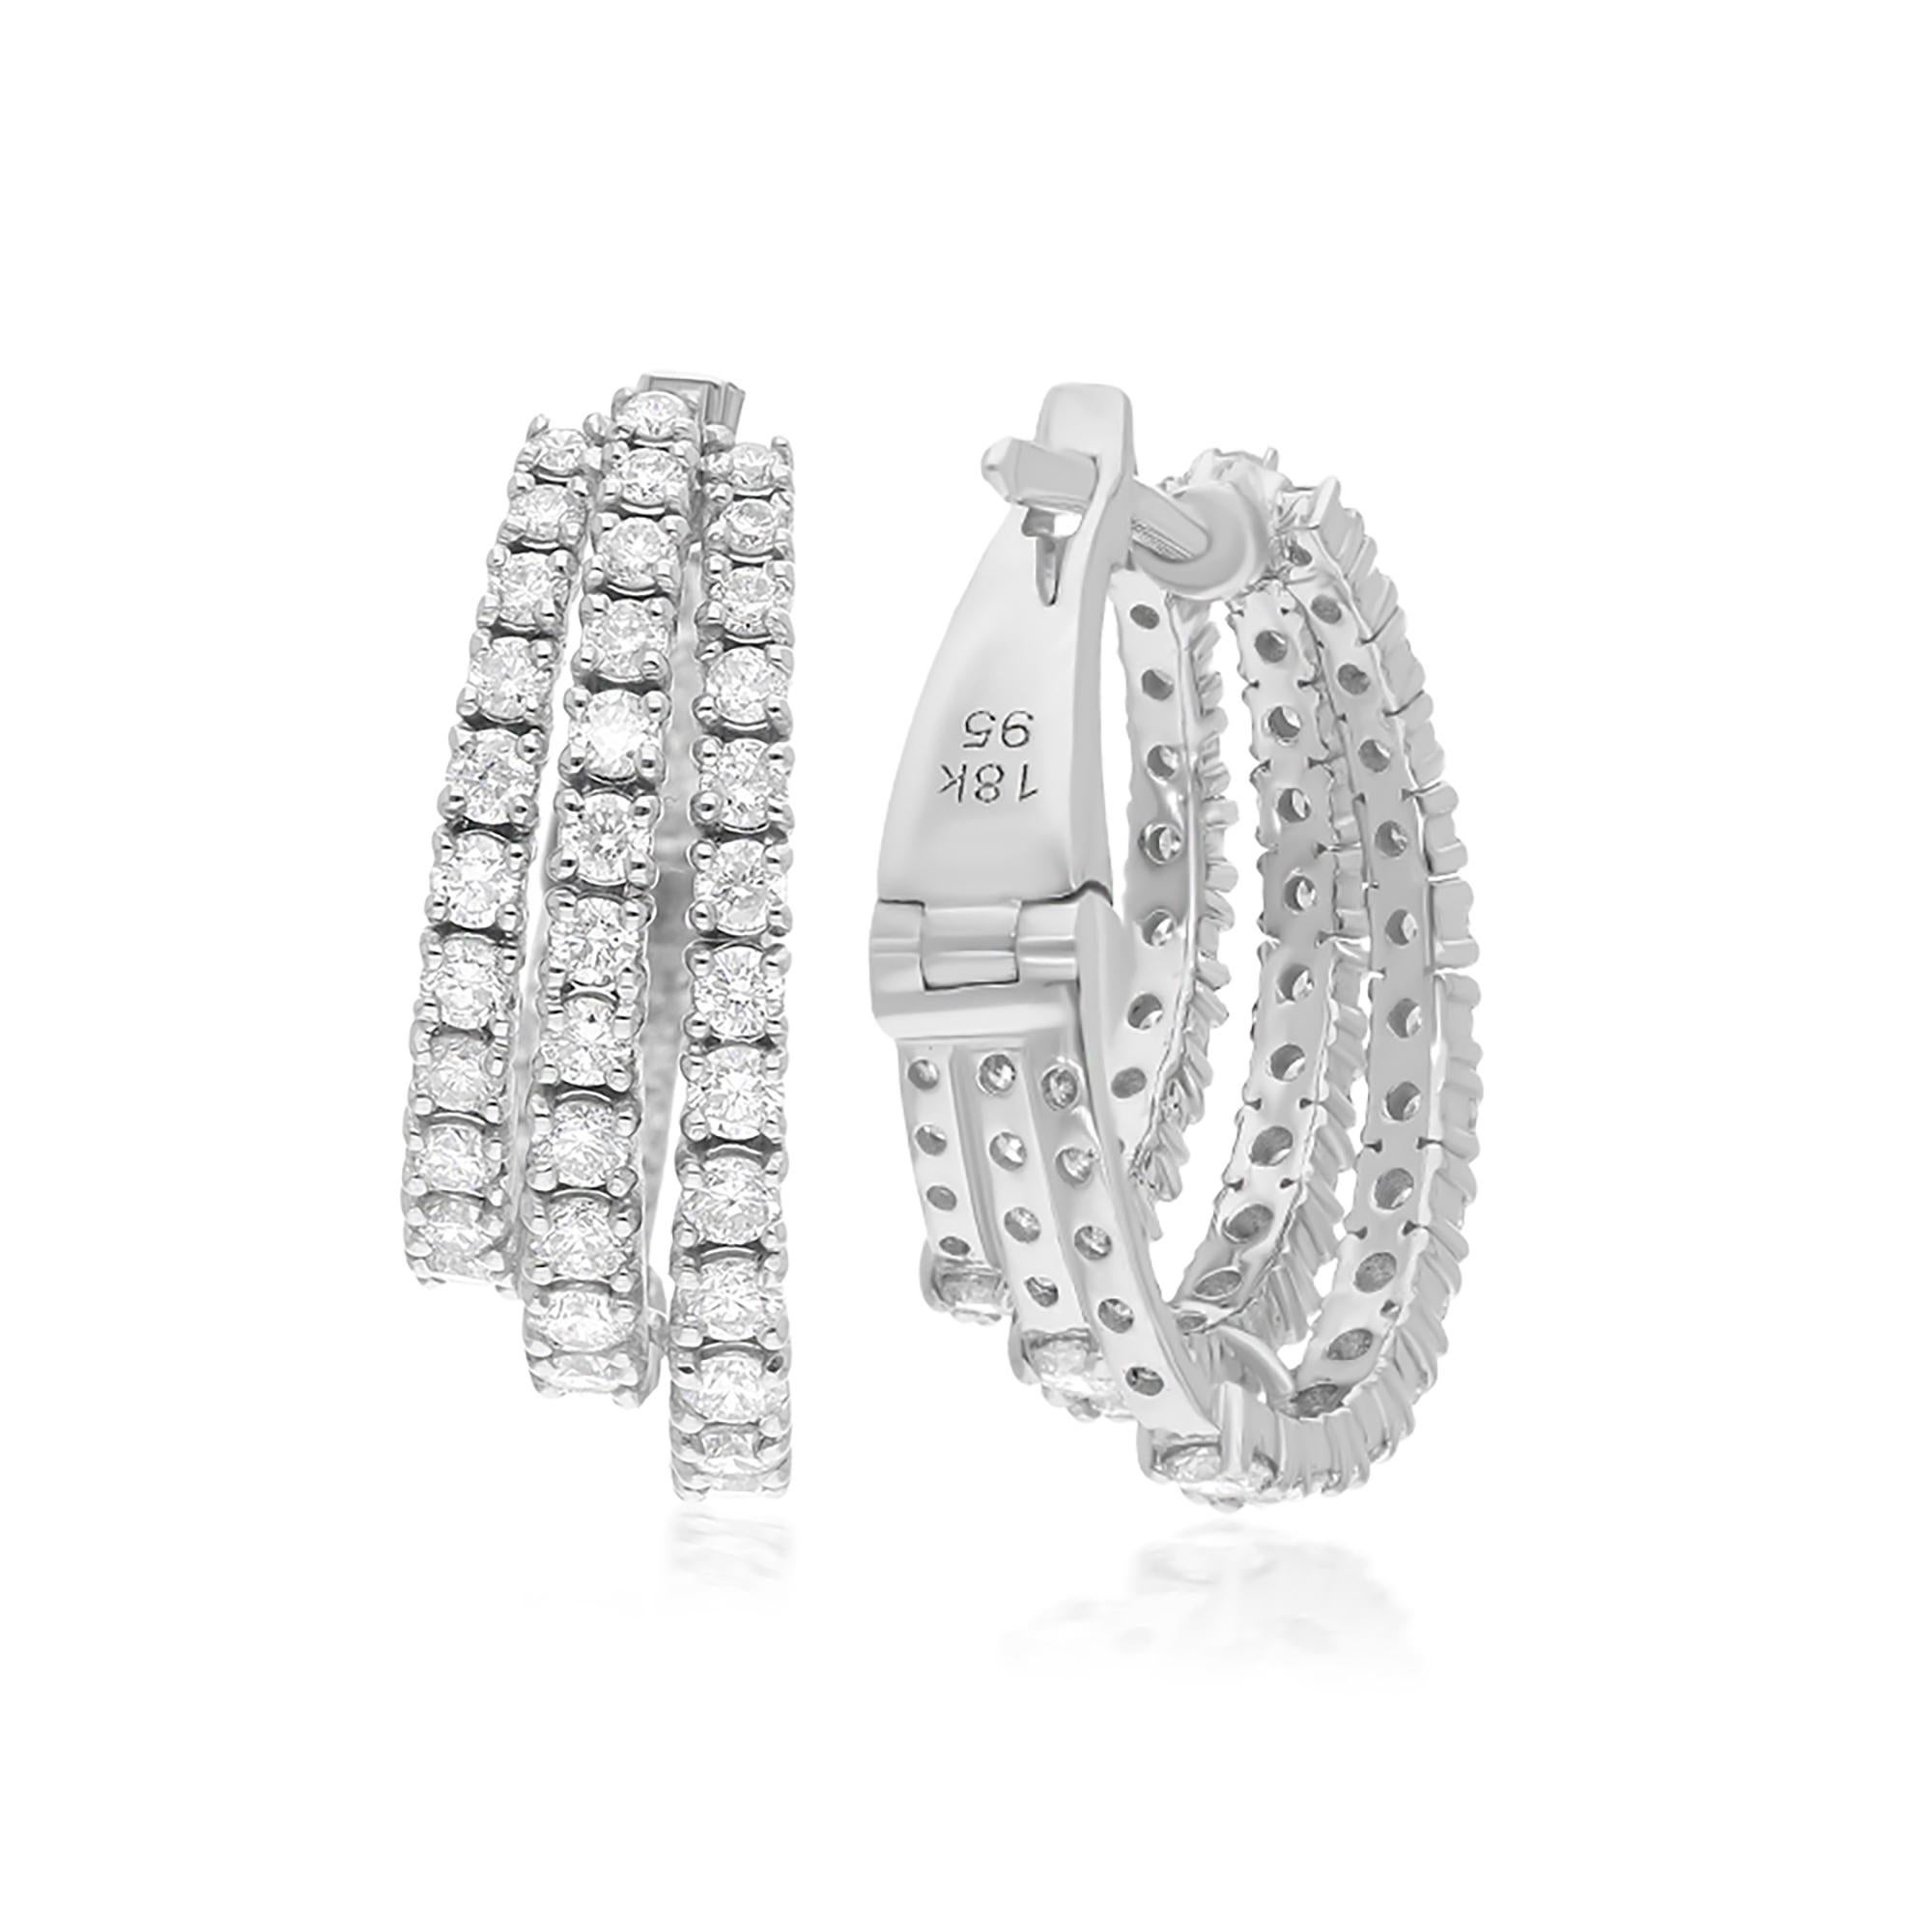 Step into the realm of timeless sophistication with these breathtaking Natural 2.11 Carat Round Diamond Hoop Earrings, crafted in luxurious 18 Karat White Gold. Exquisitely designed to capture attention and admiration, these earrings are a dazzling